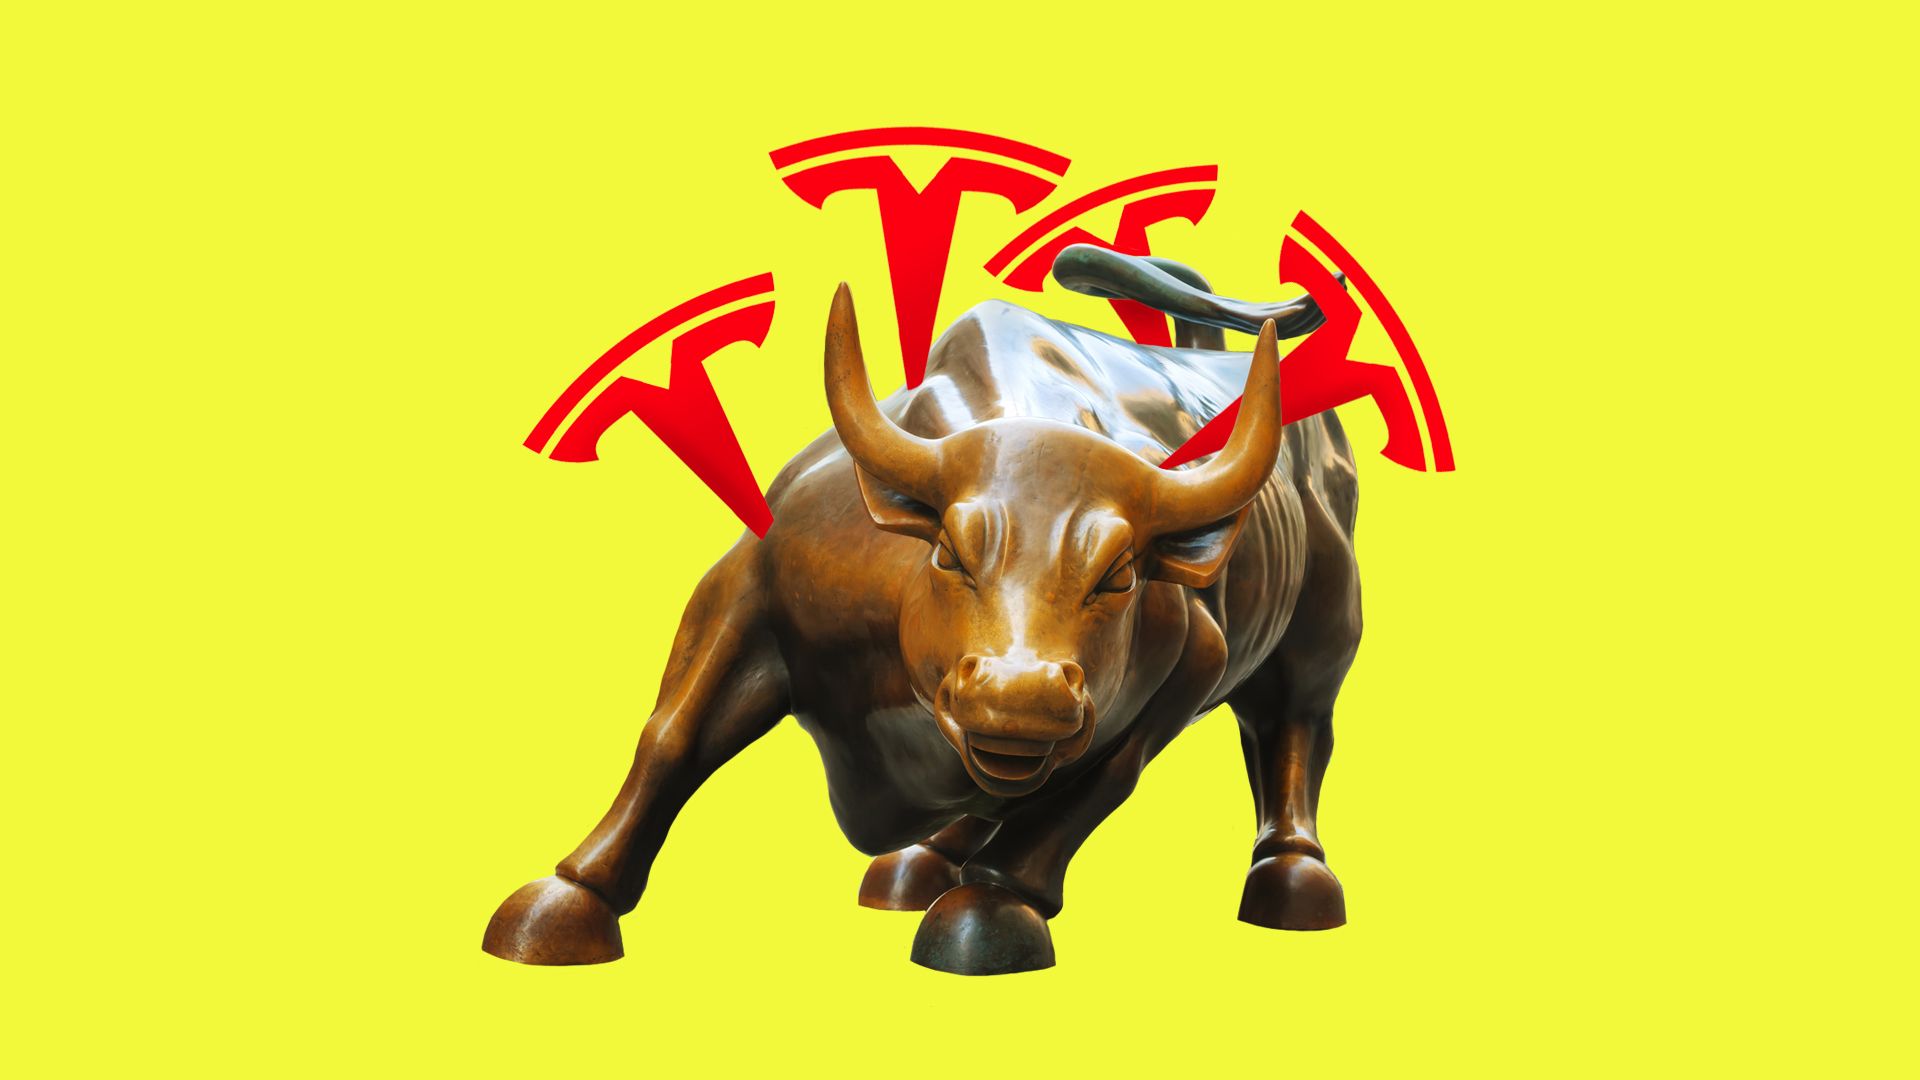 In this illustration, red Tesla logos protrude out of the Wall Street bull.